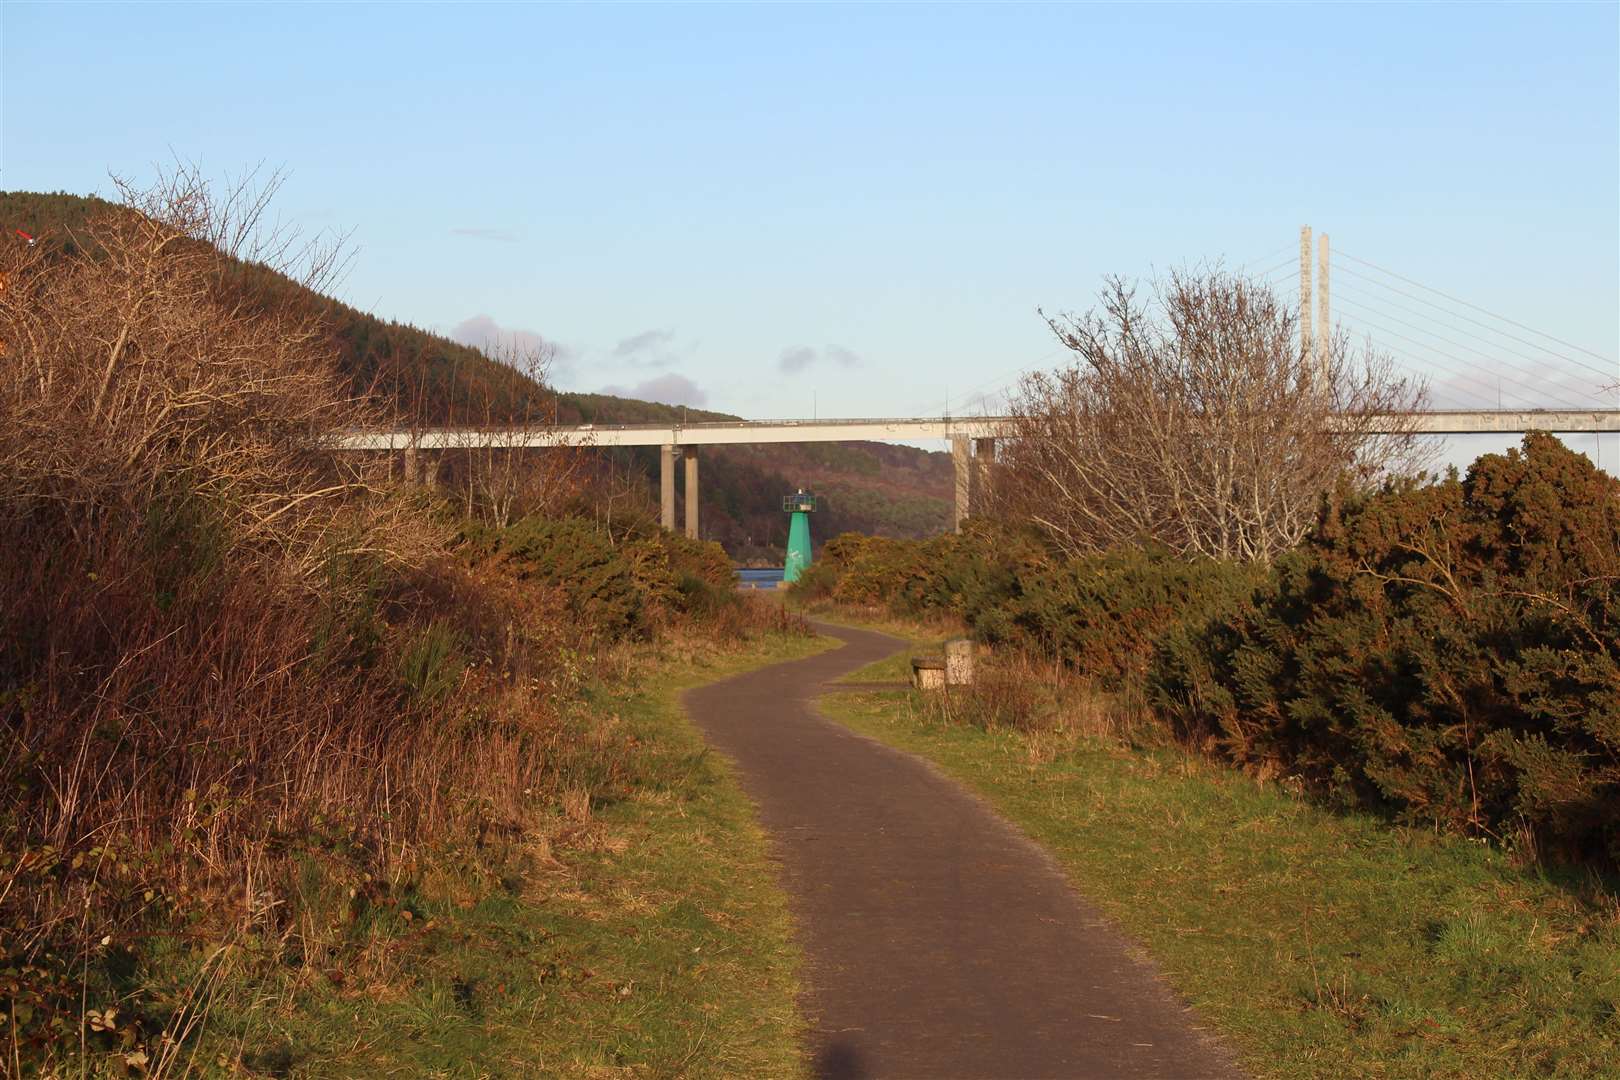 The winding path that leads to Carnarc Point, with the Kessock Bridge in view.